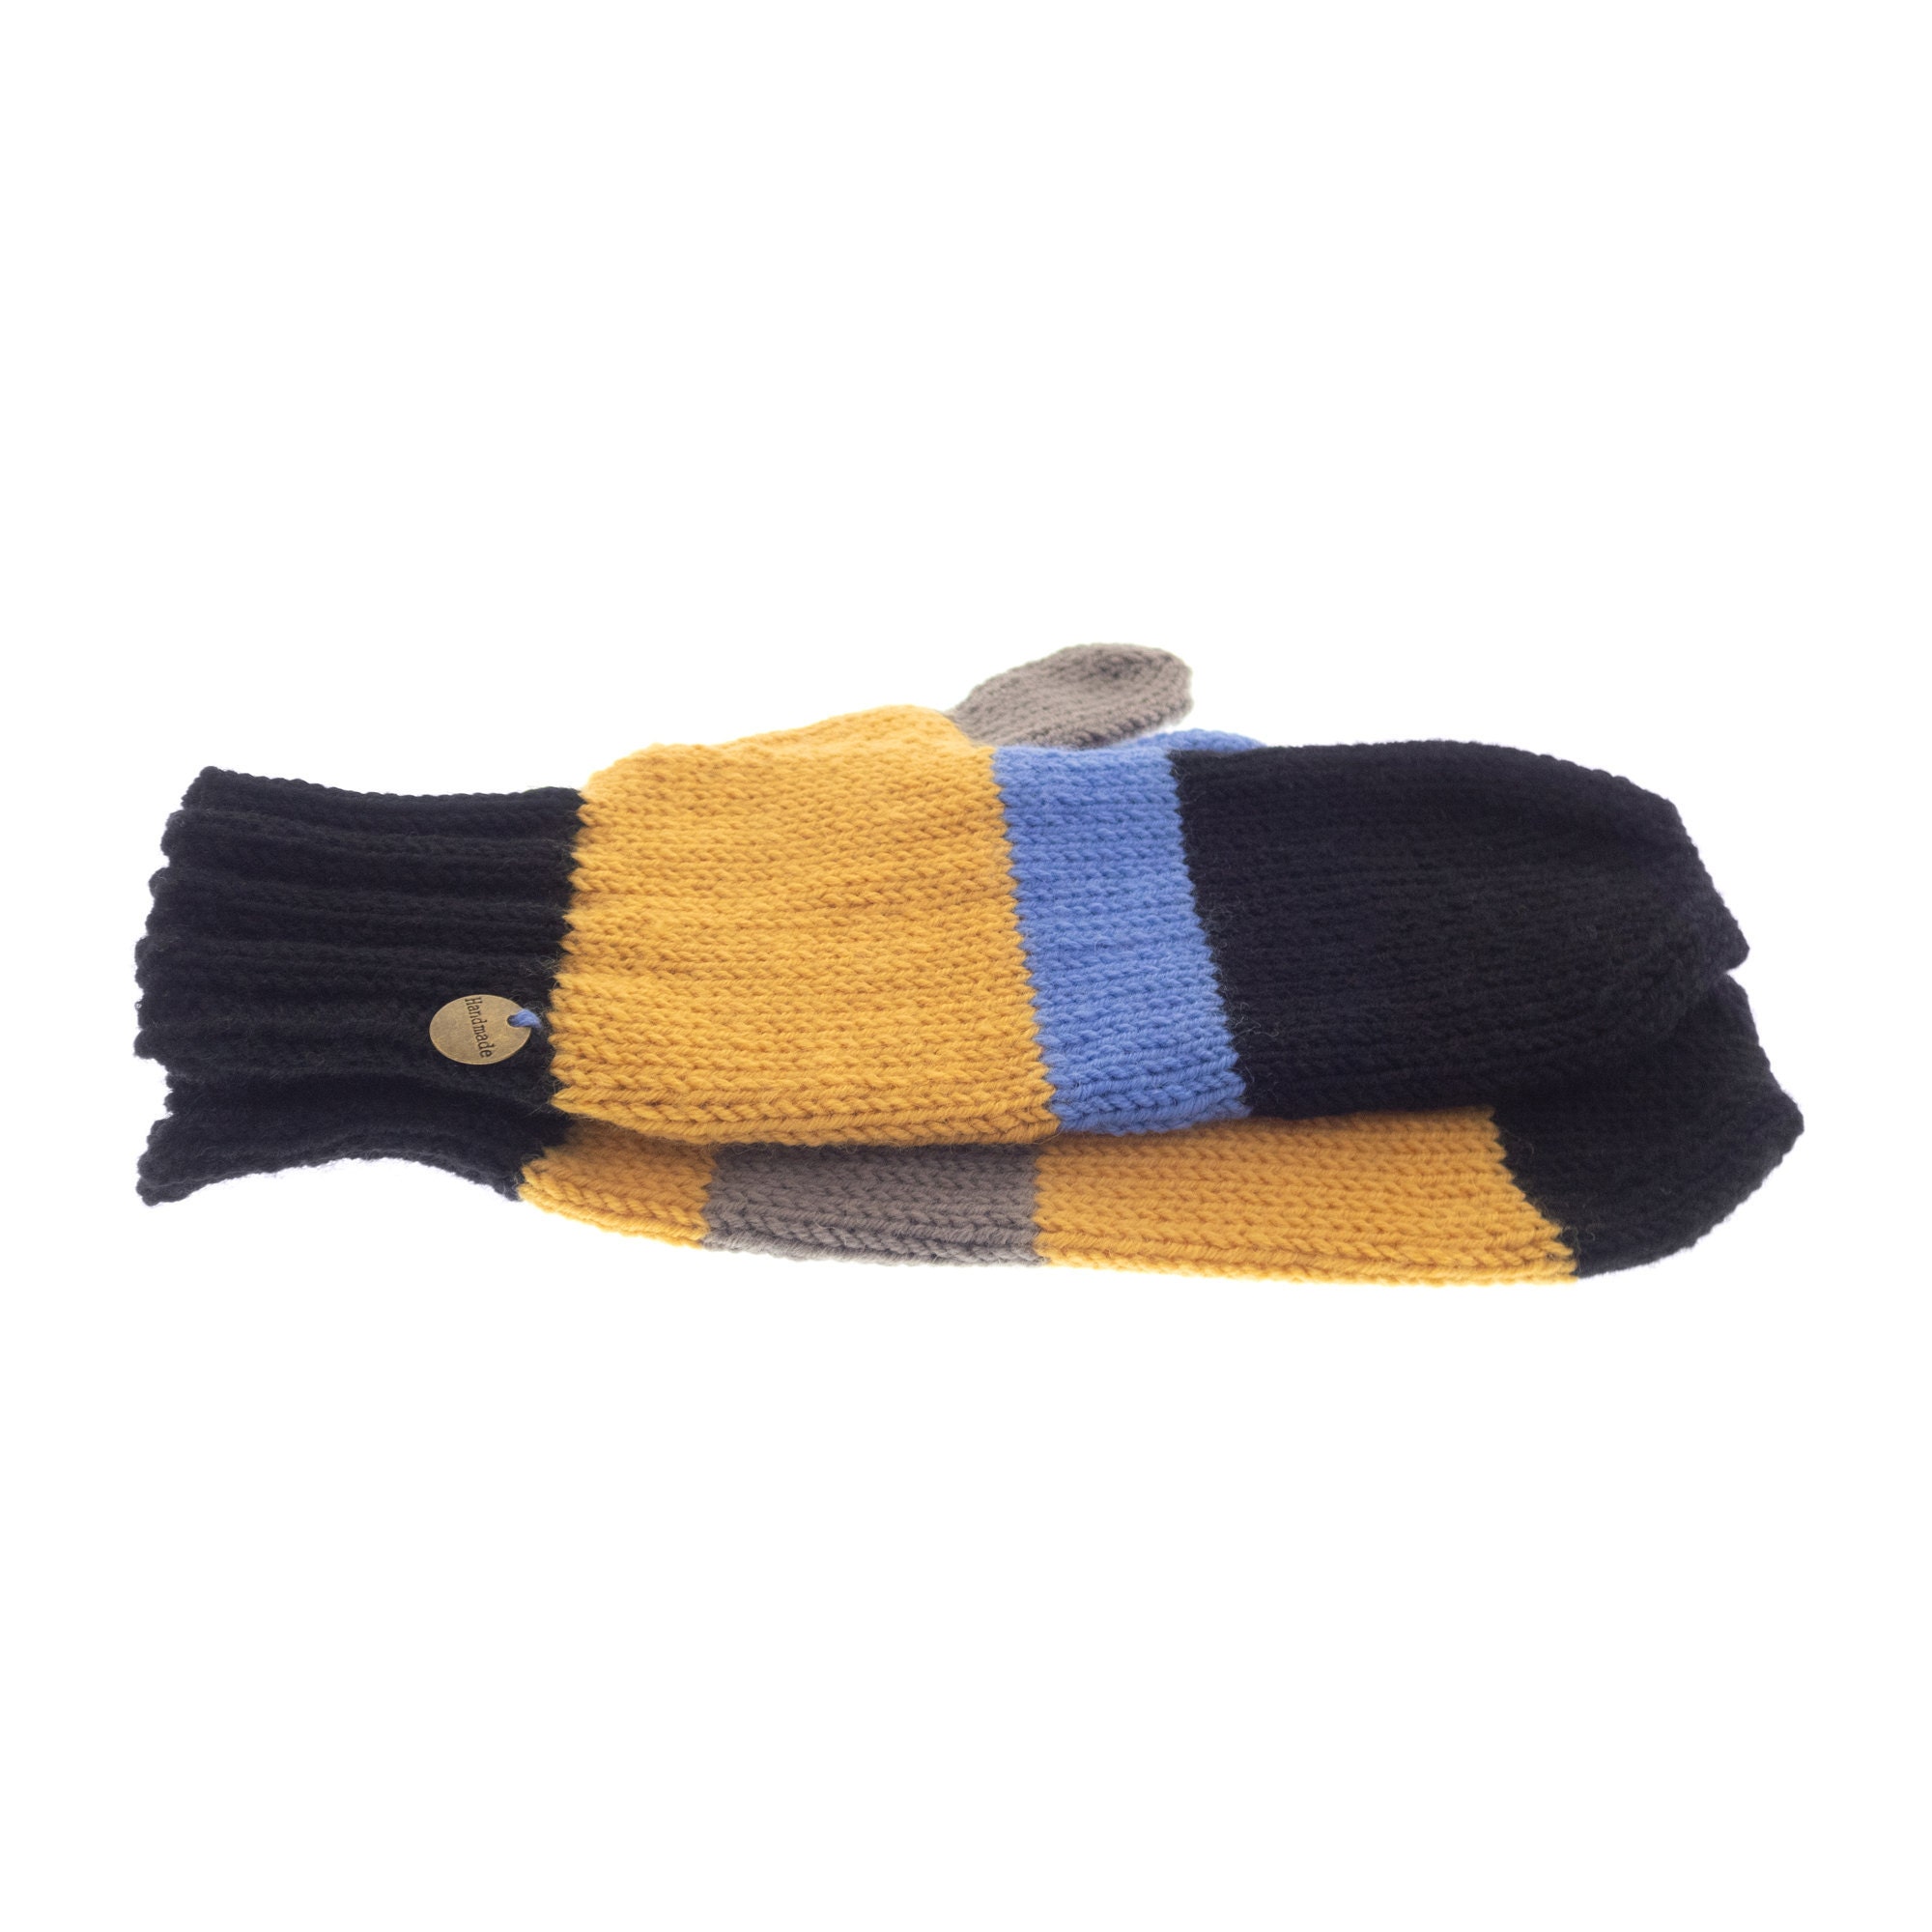 winter mittens for adults of cashmere